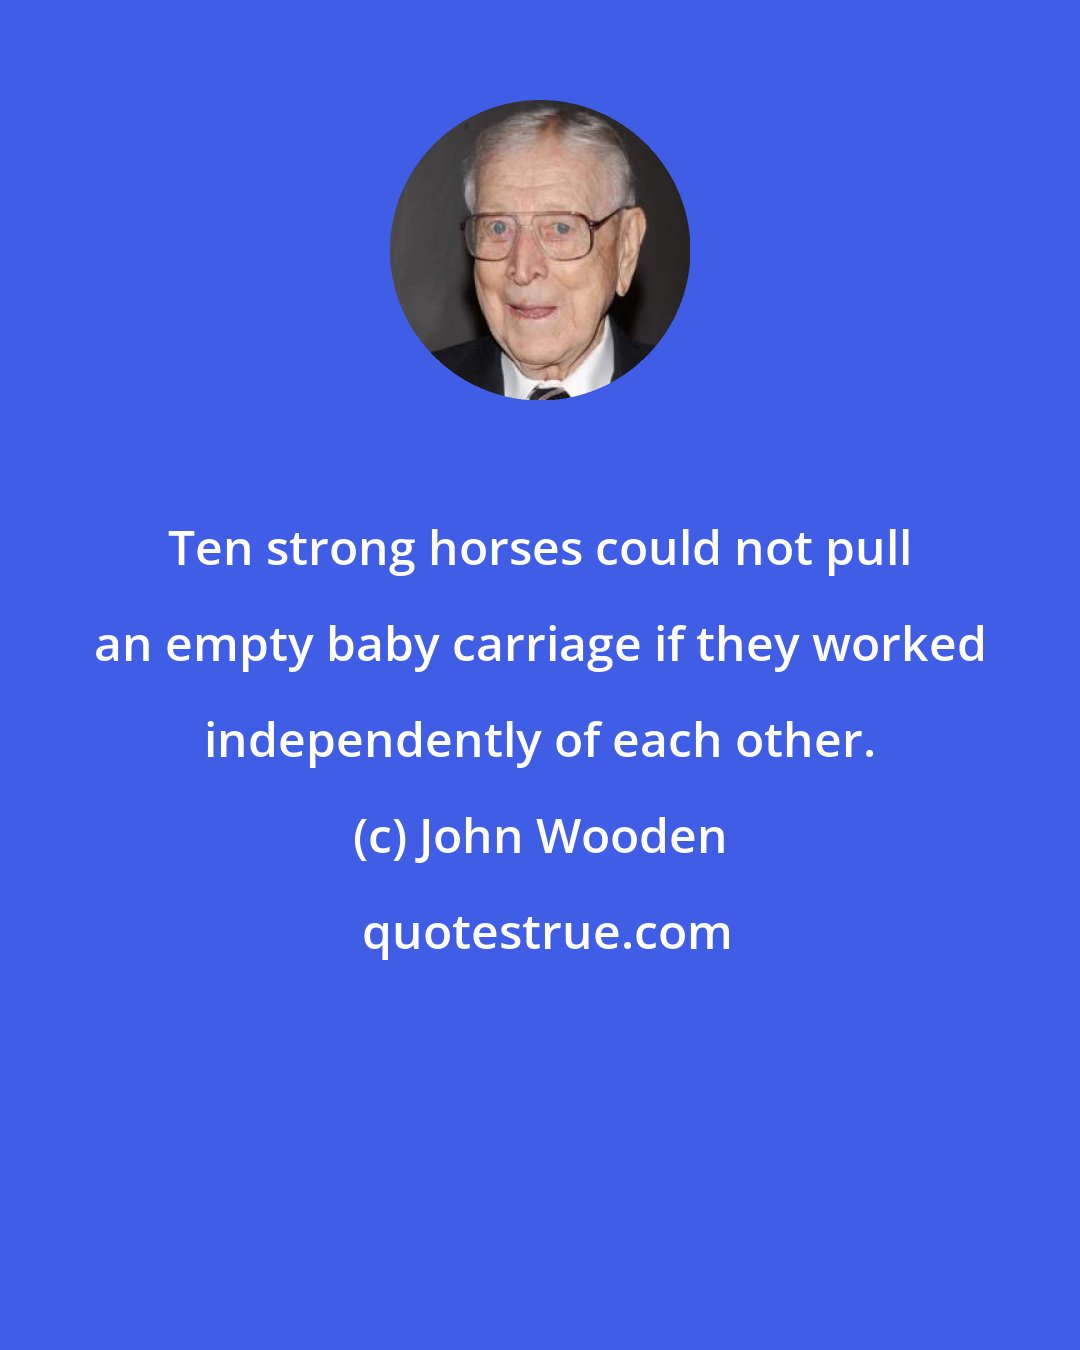 John Wooden: Ten strong horses could not pull an empty baby carriage if they worked independently of each other.